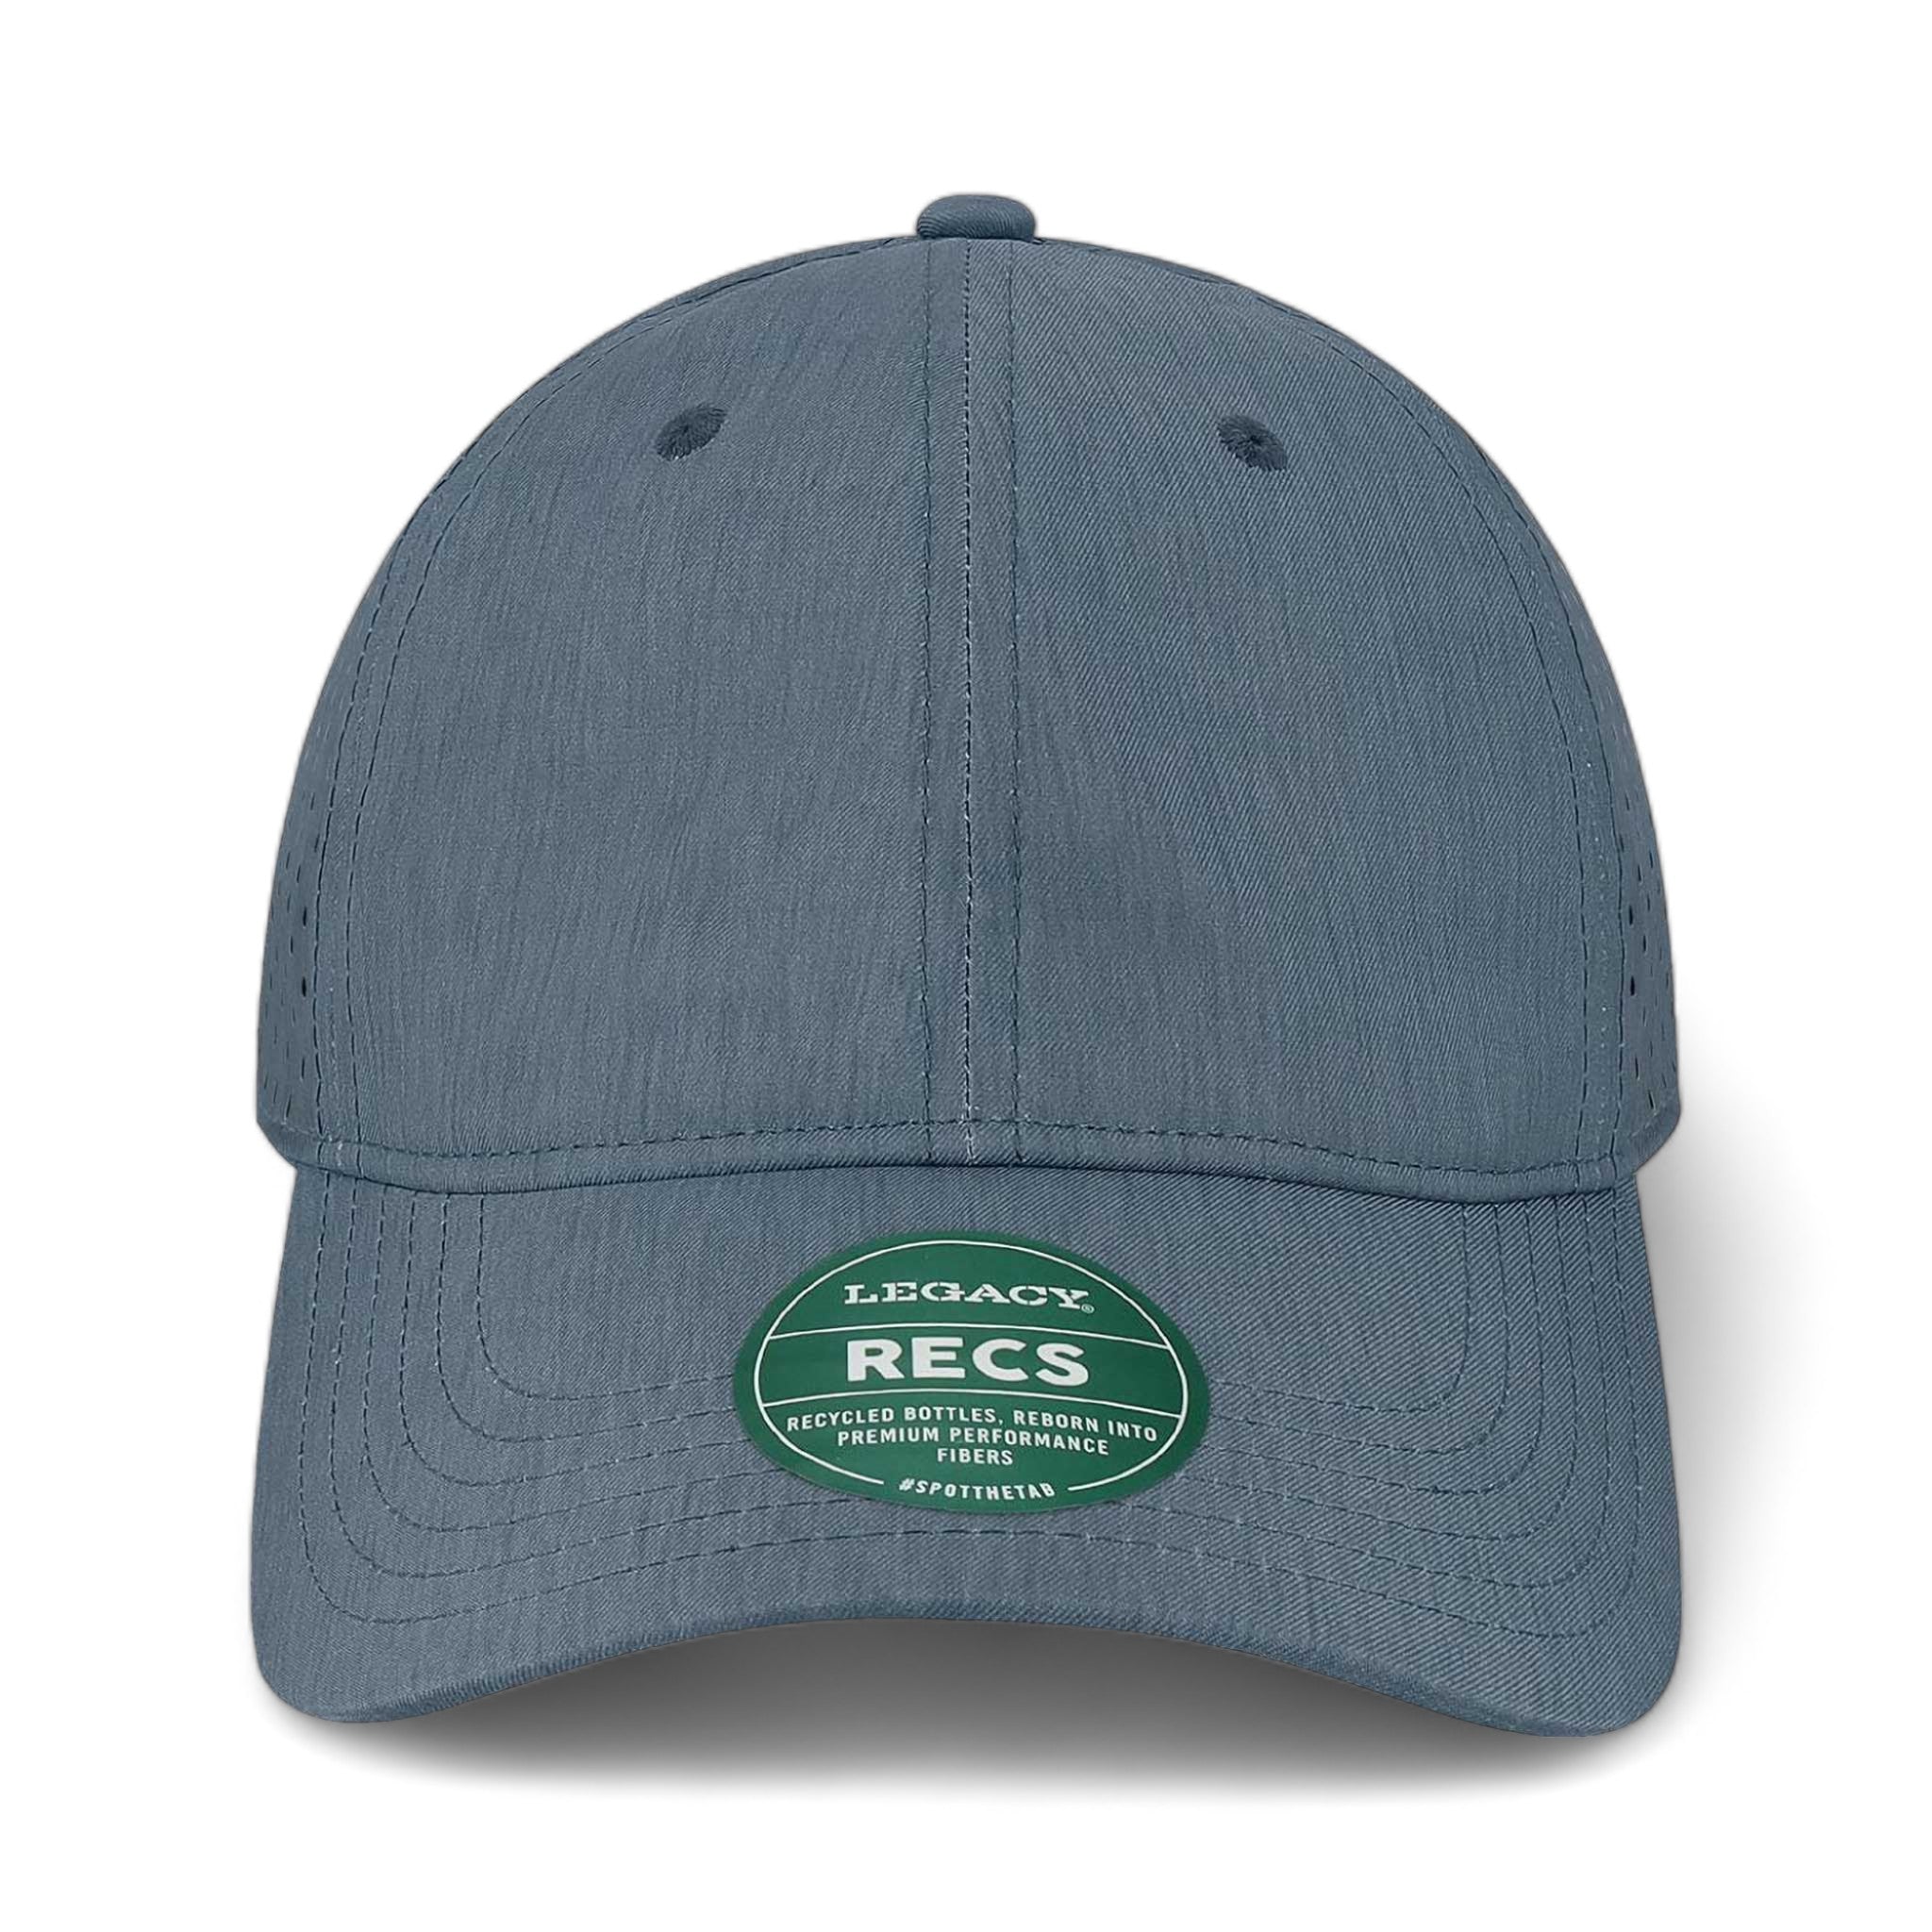 Front view of LEGACY RECS custom hat in eco navy